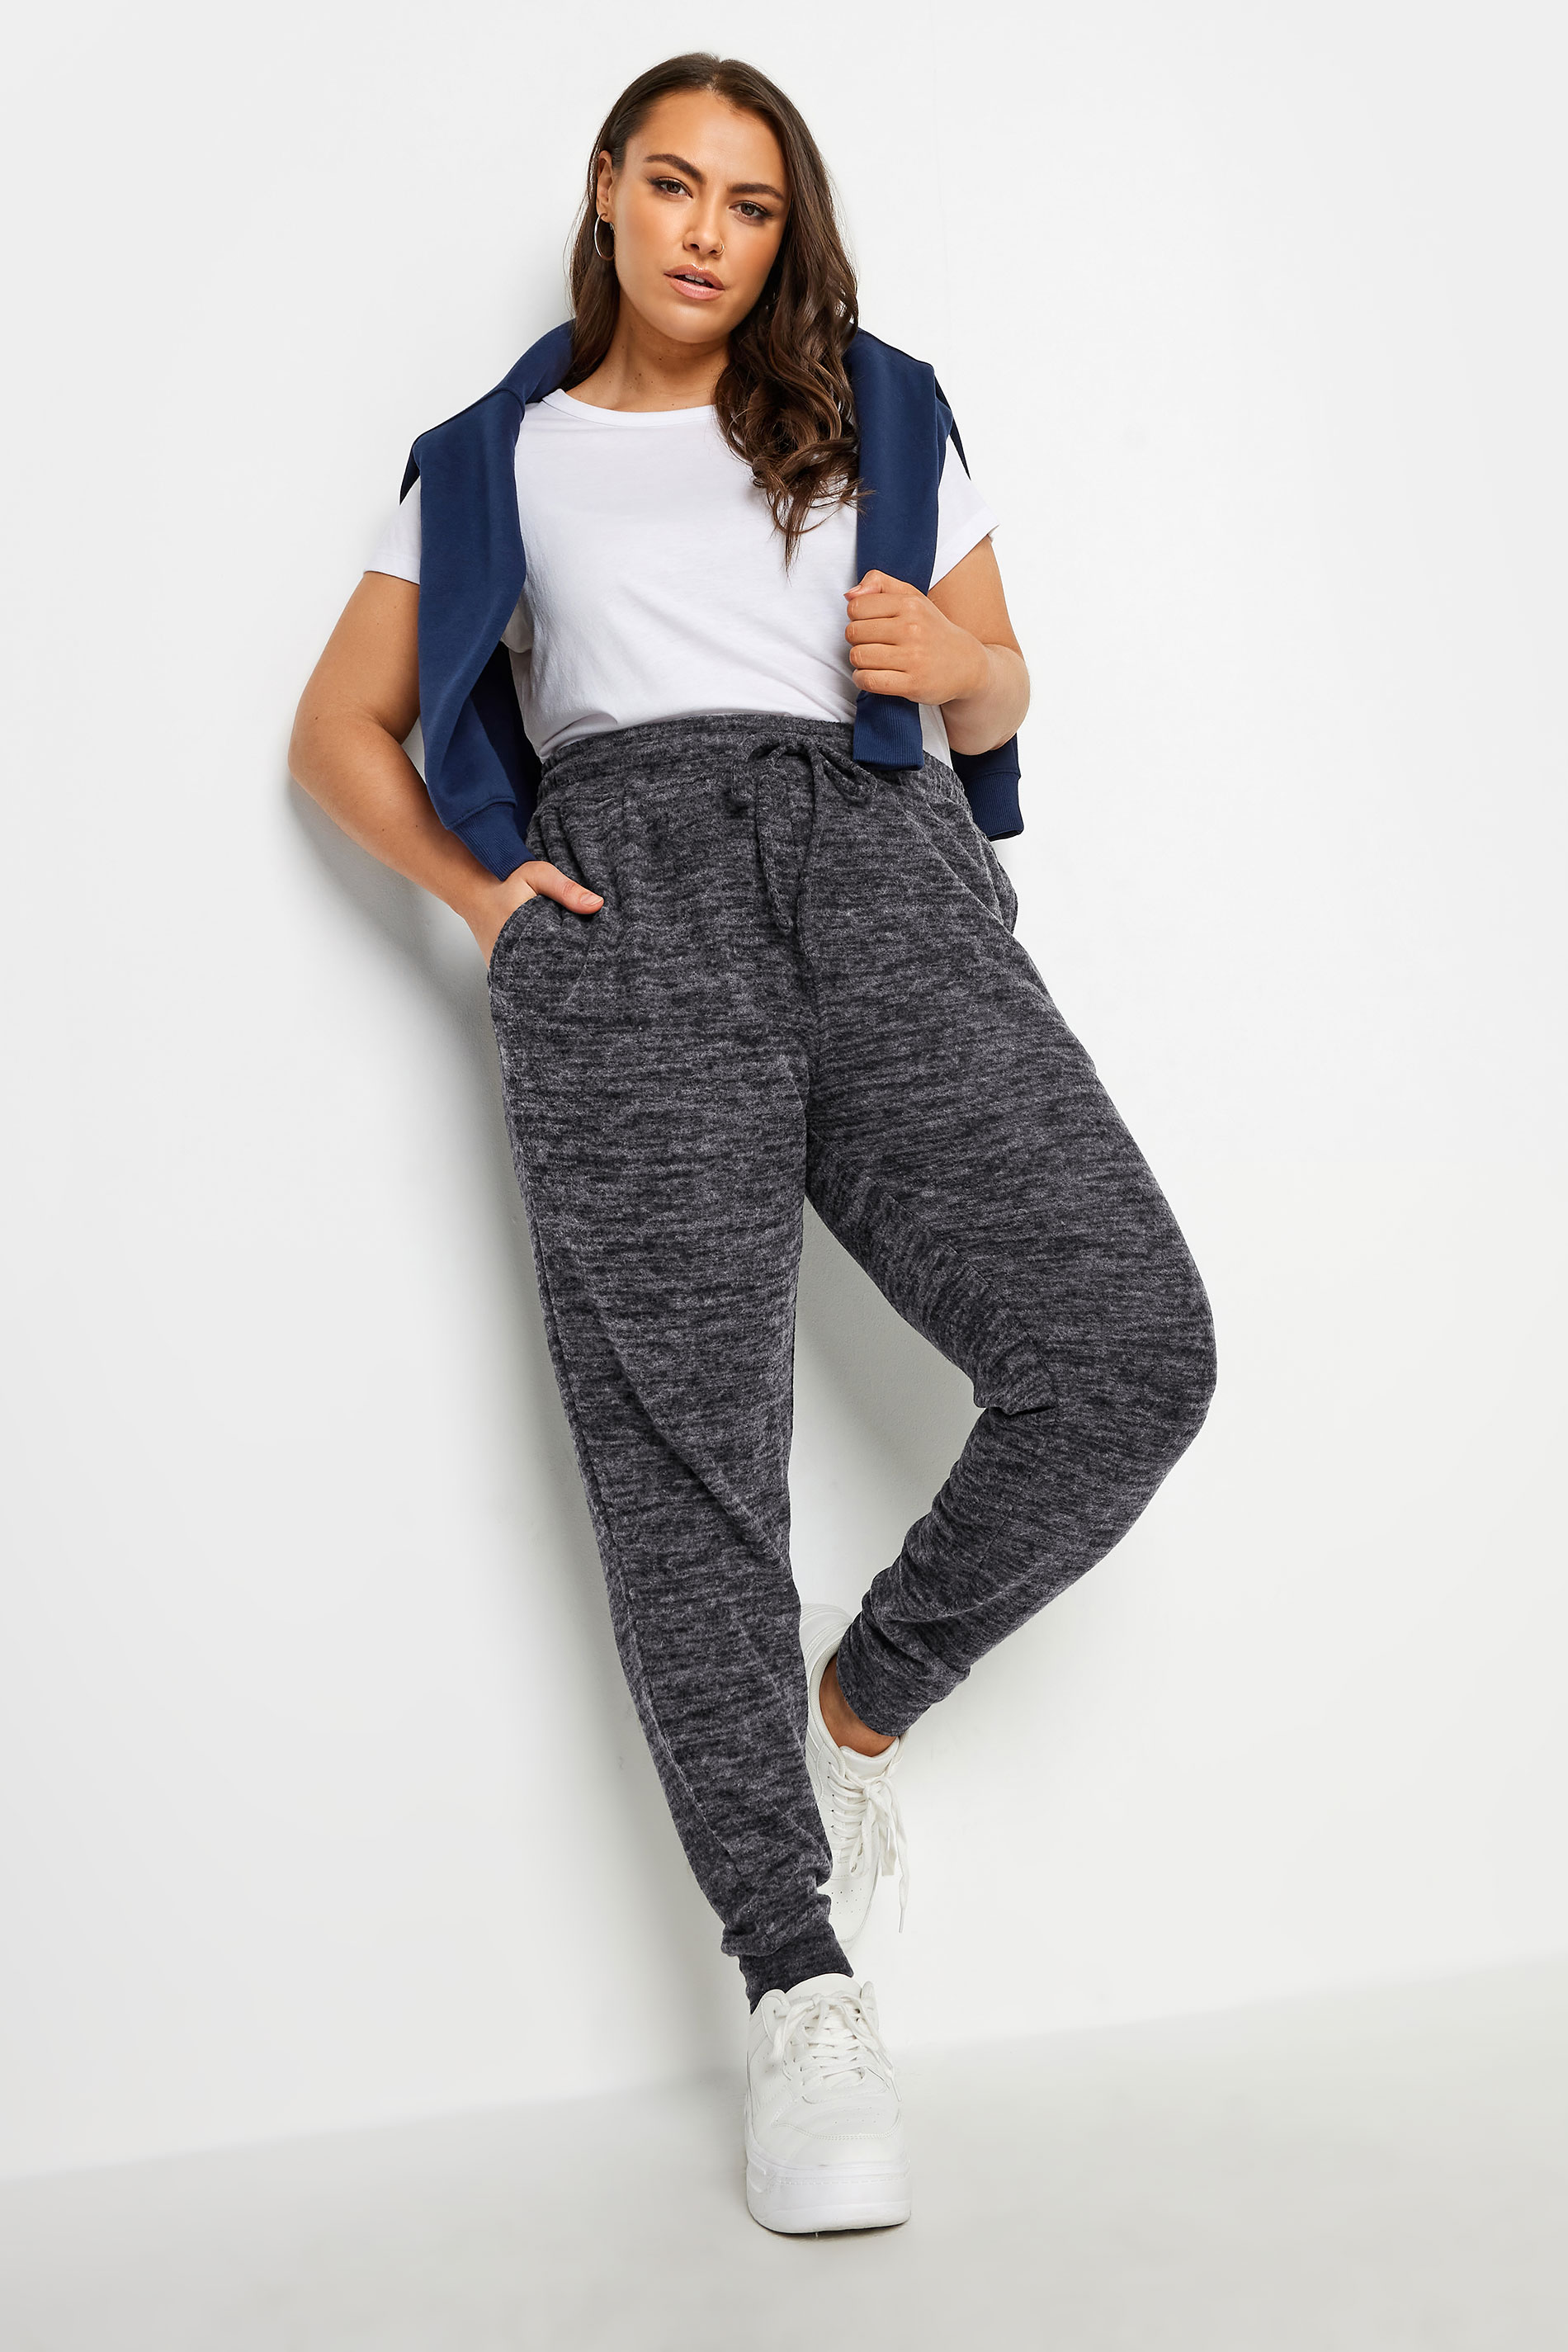 YOURS Plus Size Charcoal Grey Marl Soft Touch Cuffed Joggers